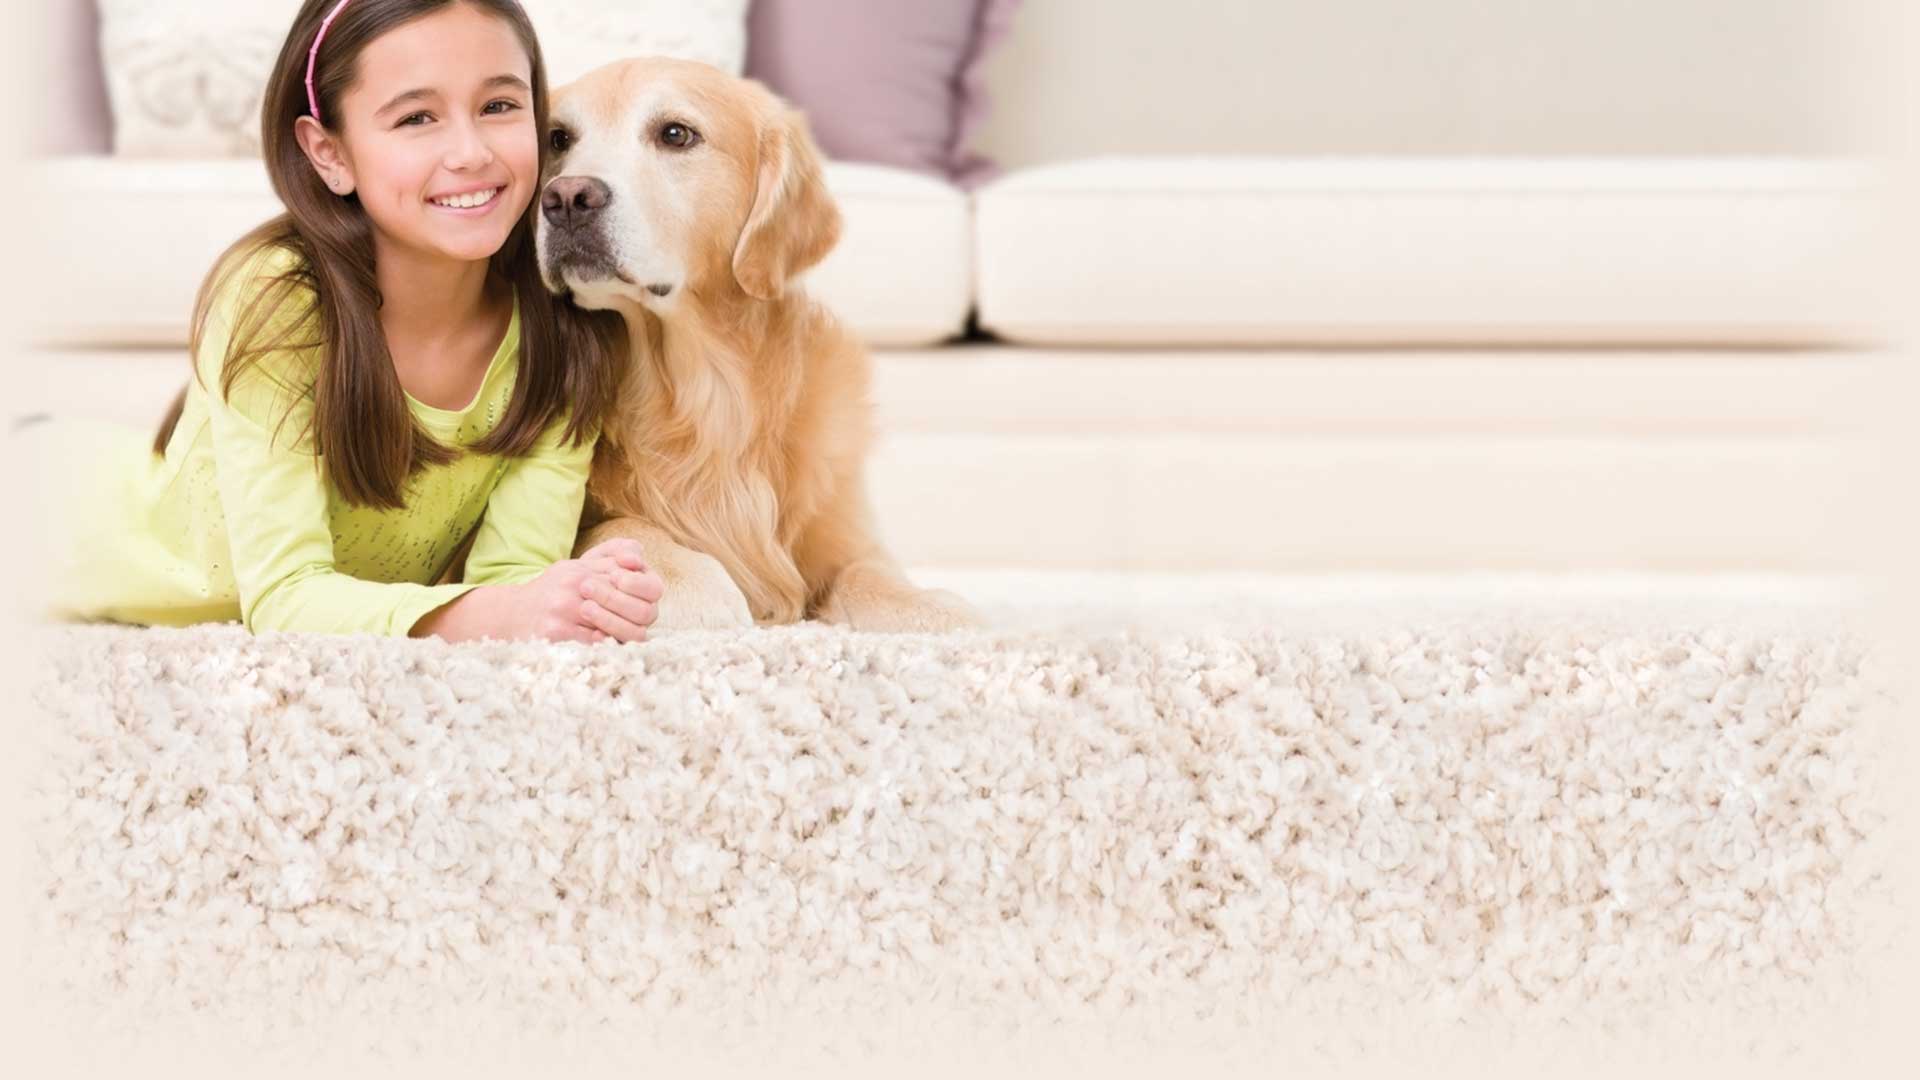 Pet and human friendly carpet cleaning service in Palm Springs, CA